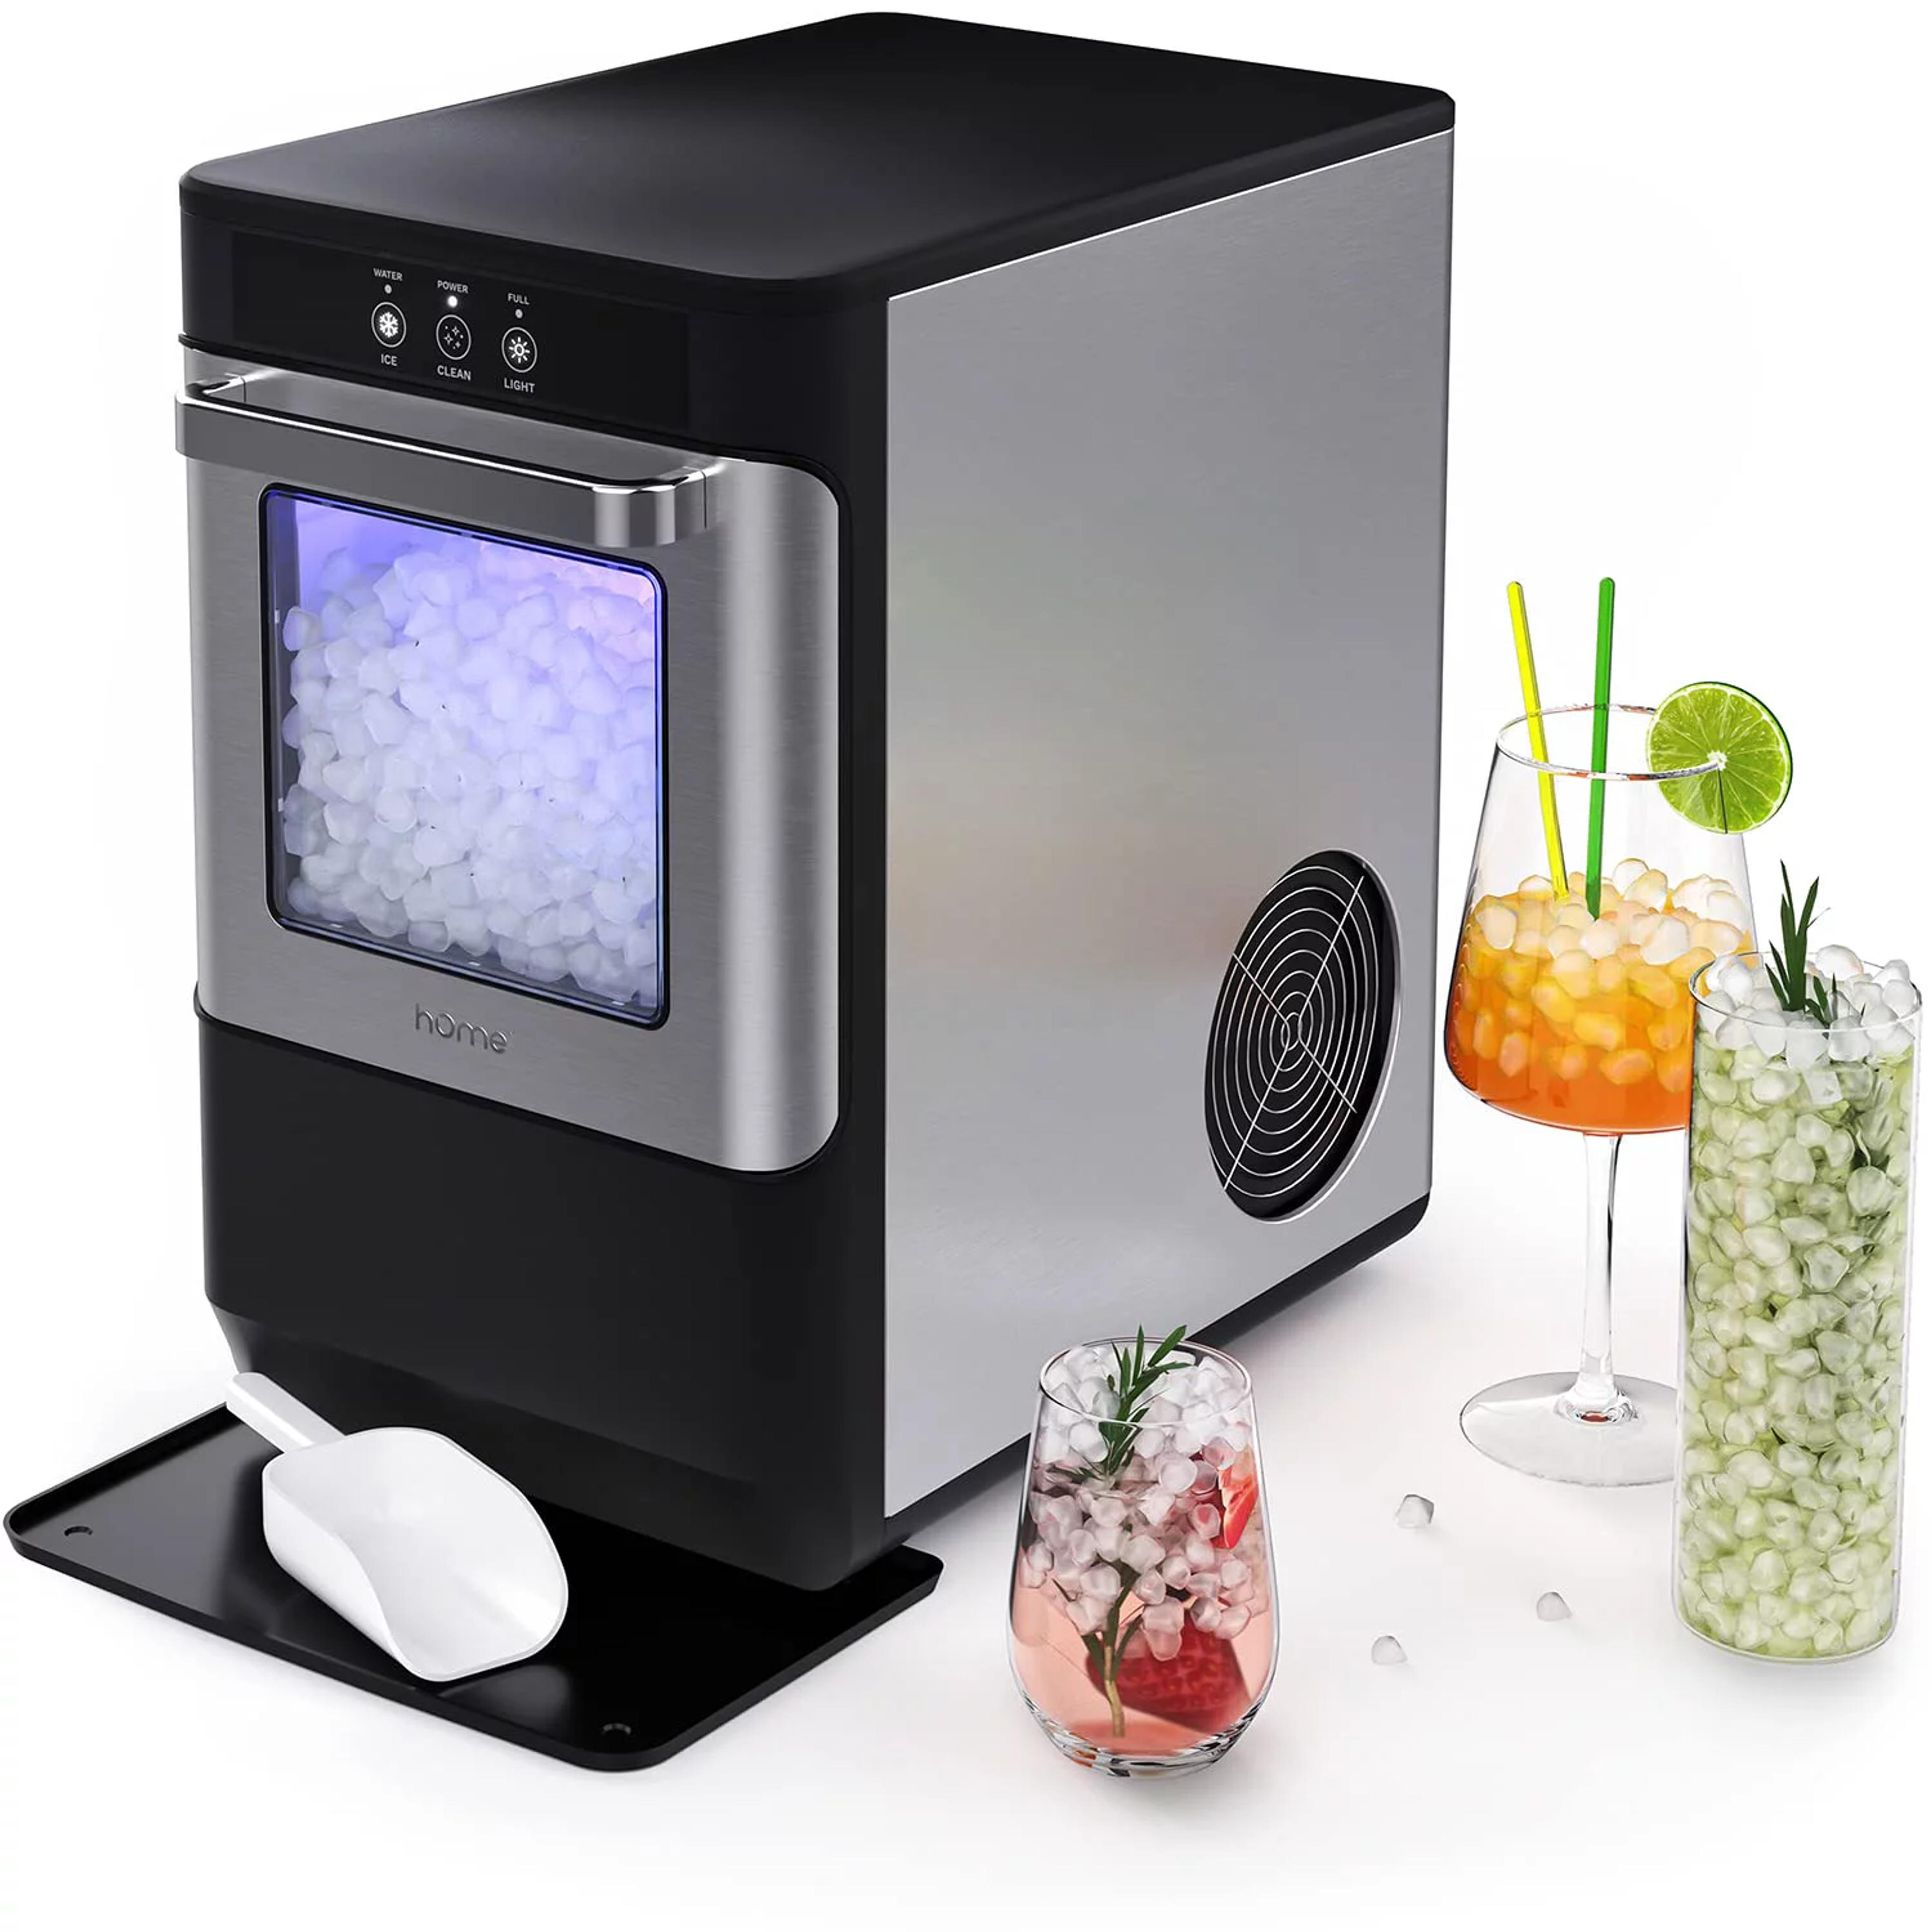 hOmeLabs Countertop Nugget Ice Maker - Stainless Steel with Touch Screen - Portable and Compact - Chewable Nugget Ice Machine - Produces Up to 44lb of Ice Per Day - Walmart.com